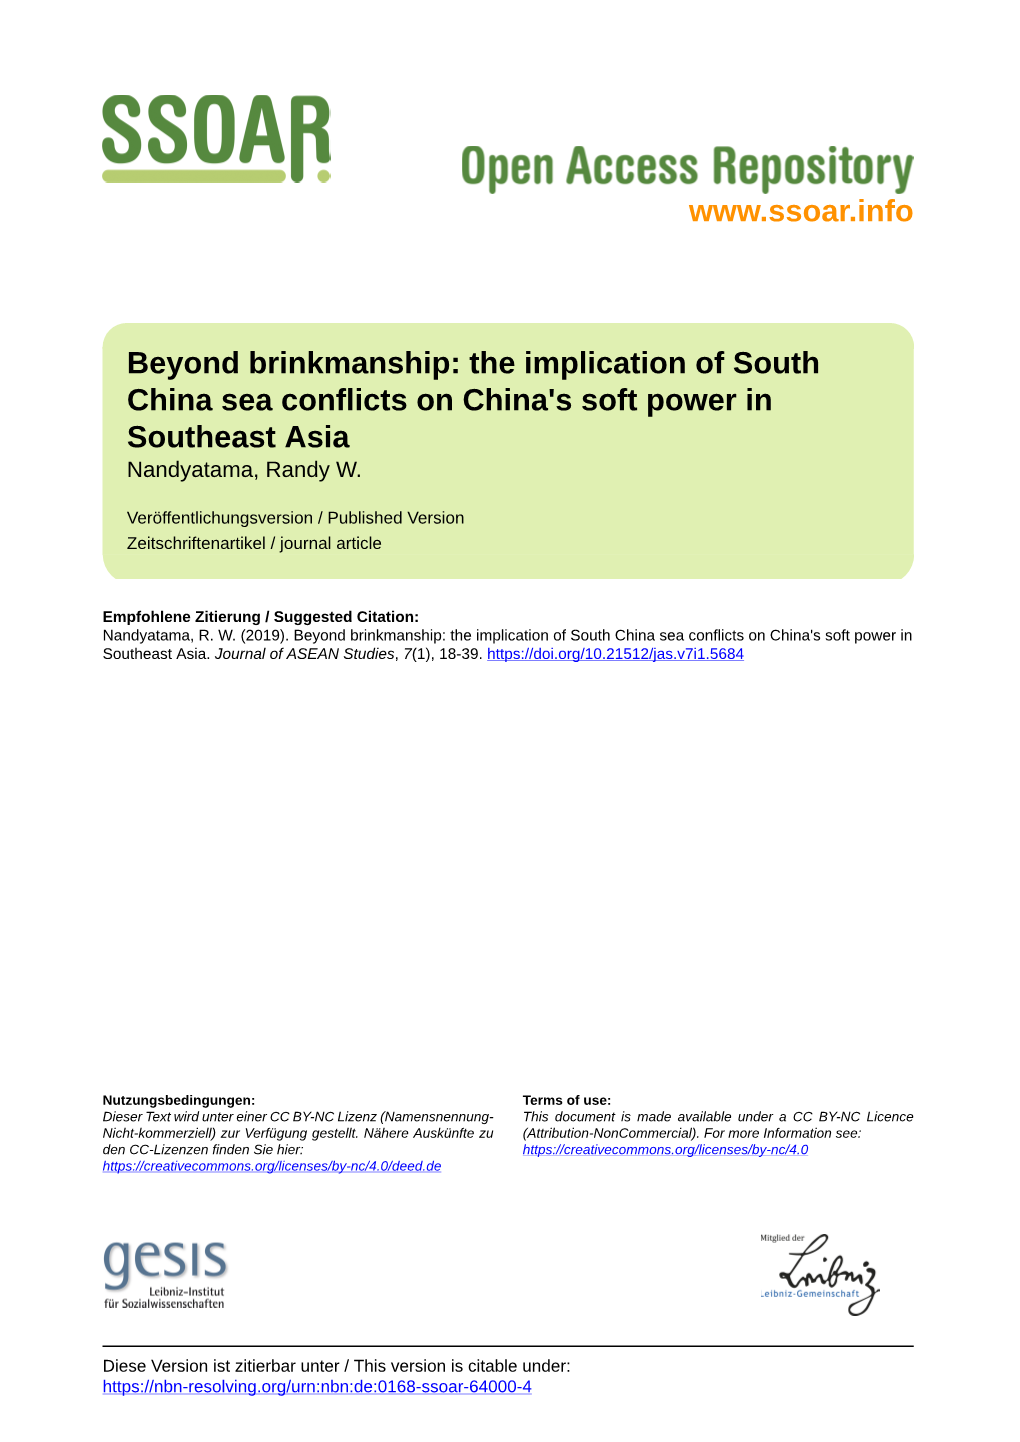 The Implication of South China Sea Conflicts on China's Soft Power in Southeast Asia Nandyatama, Randy W